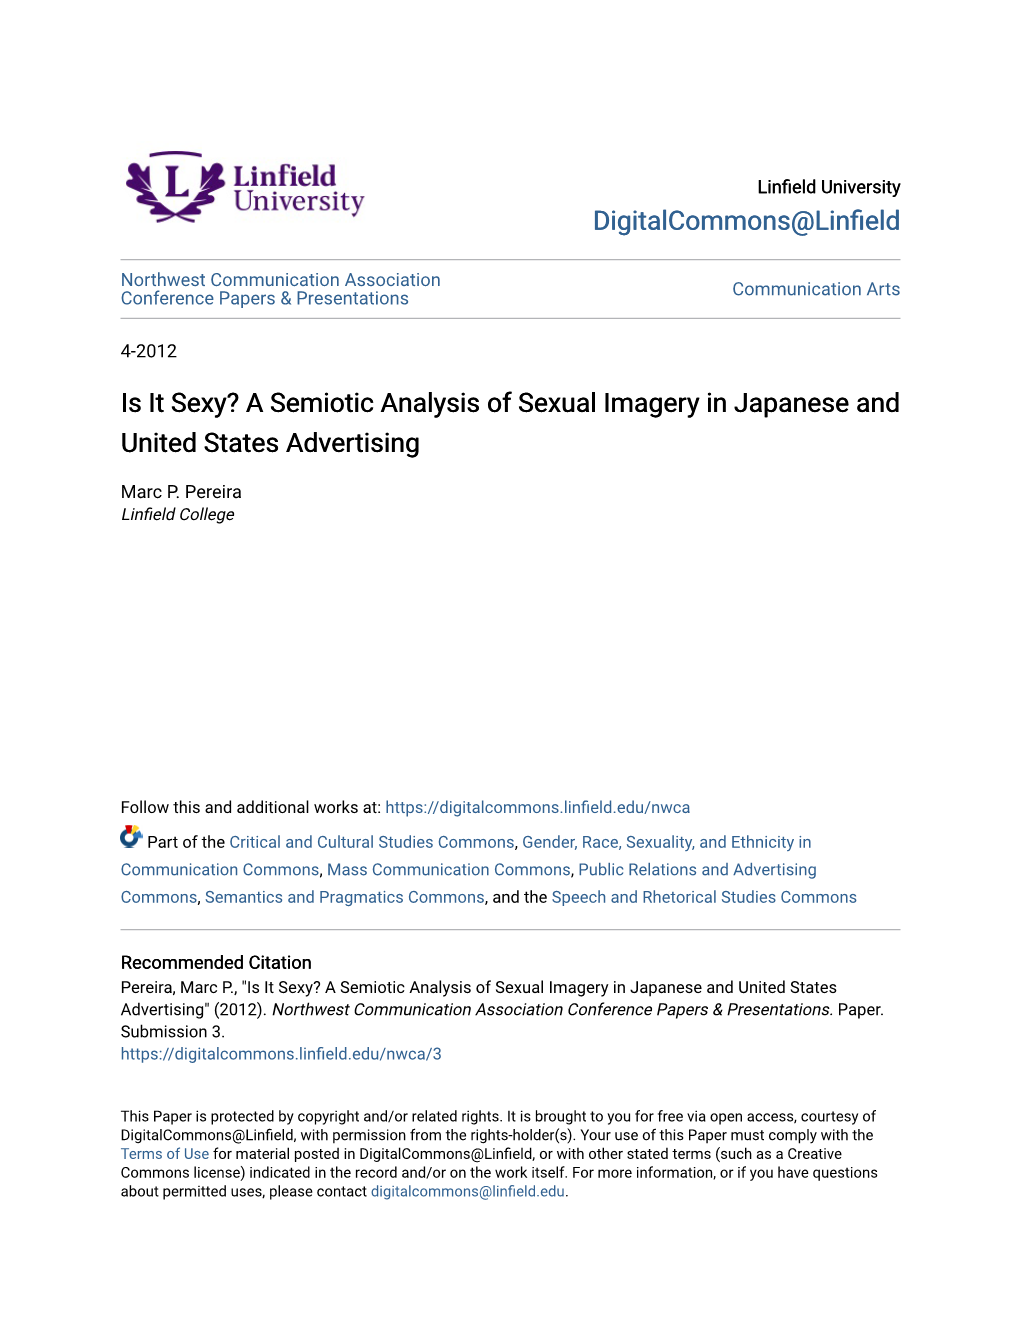 A Semiotic Analysis of Sexual Imagery in Japanese and United States Advertising